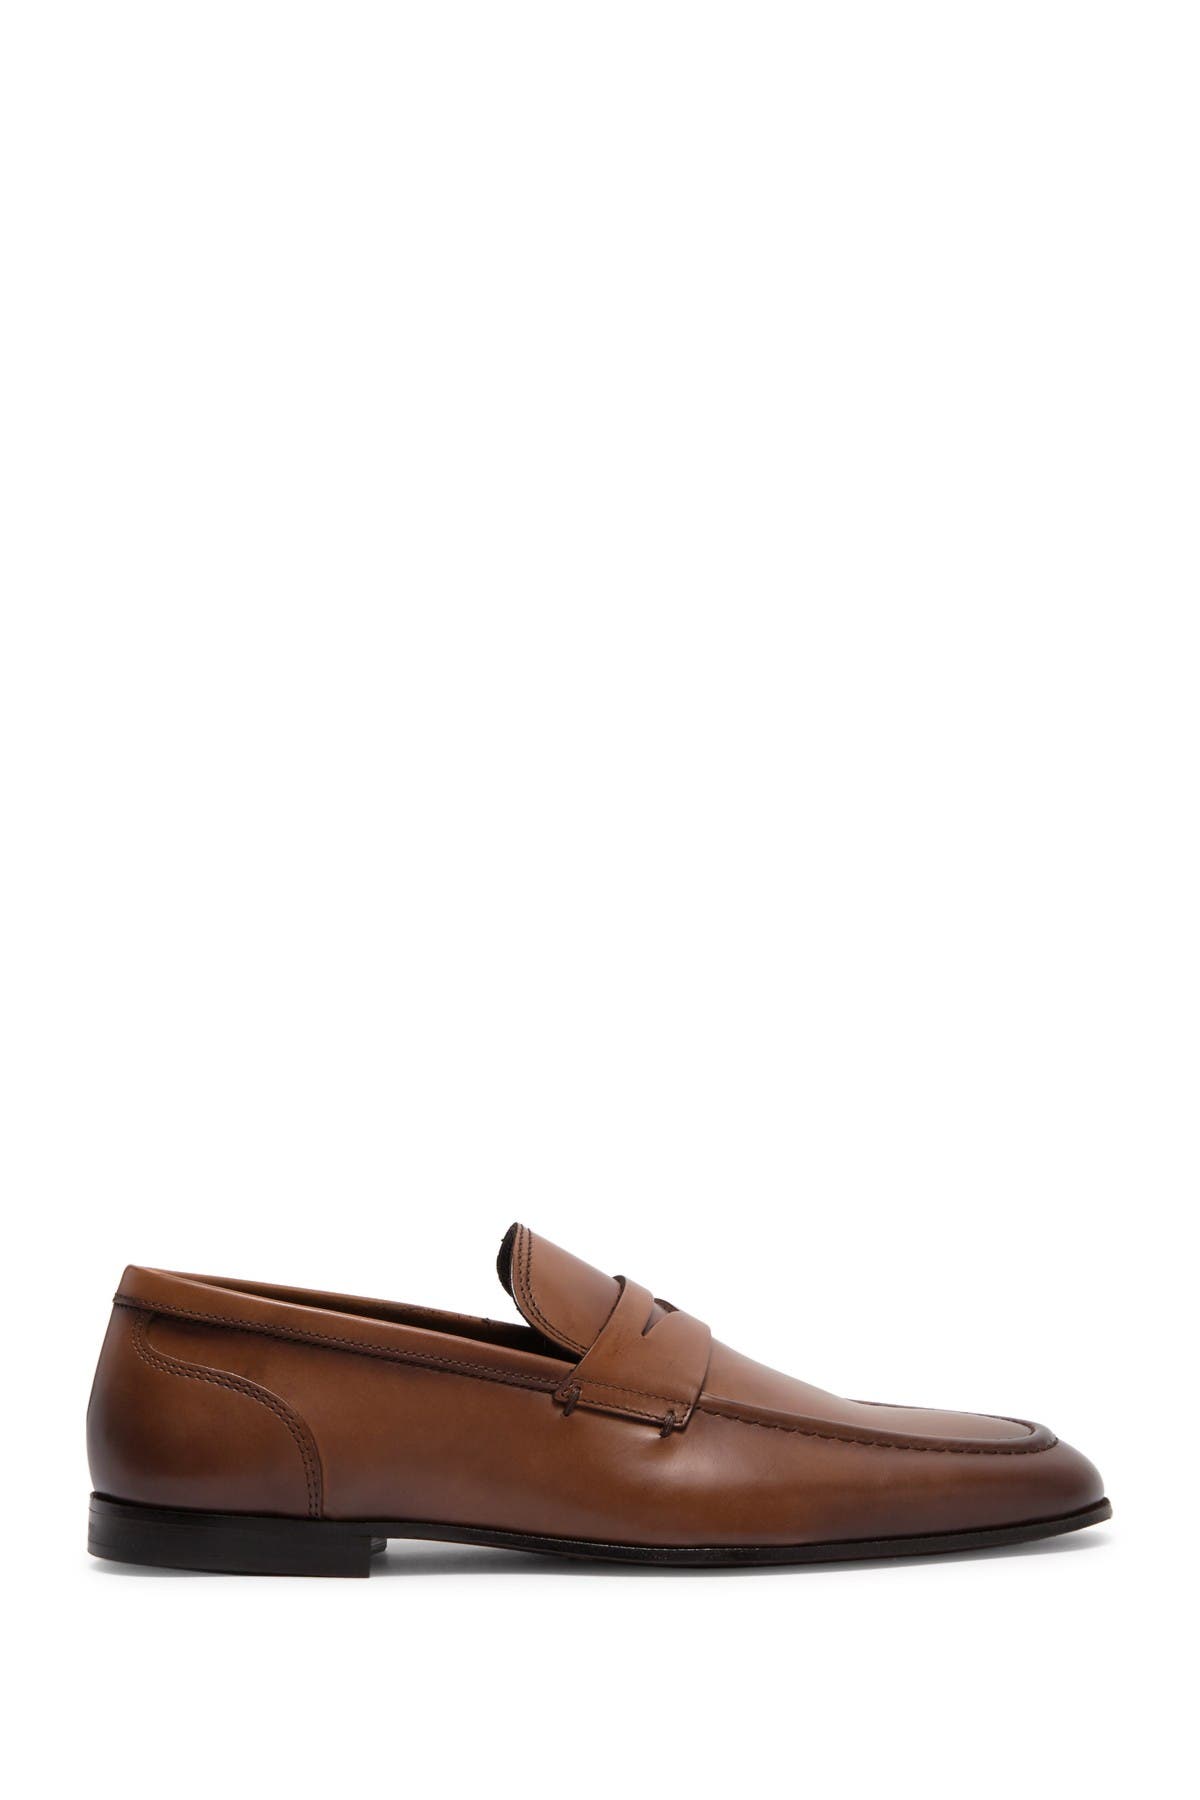 to boot new york penny loafer